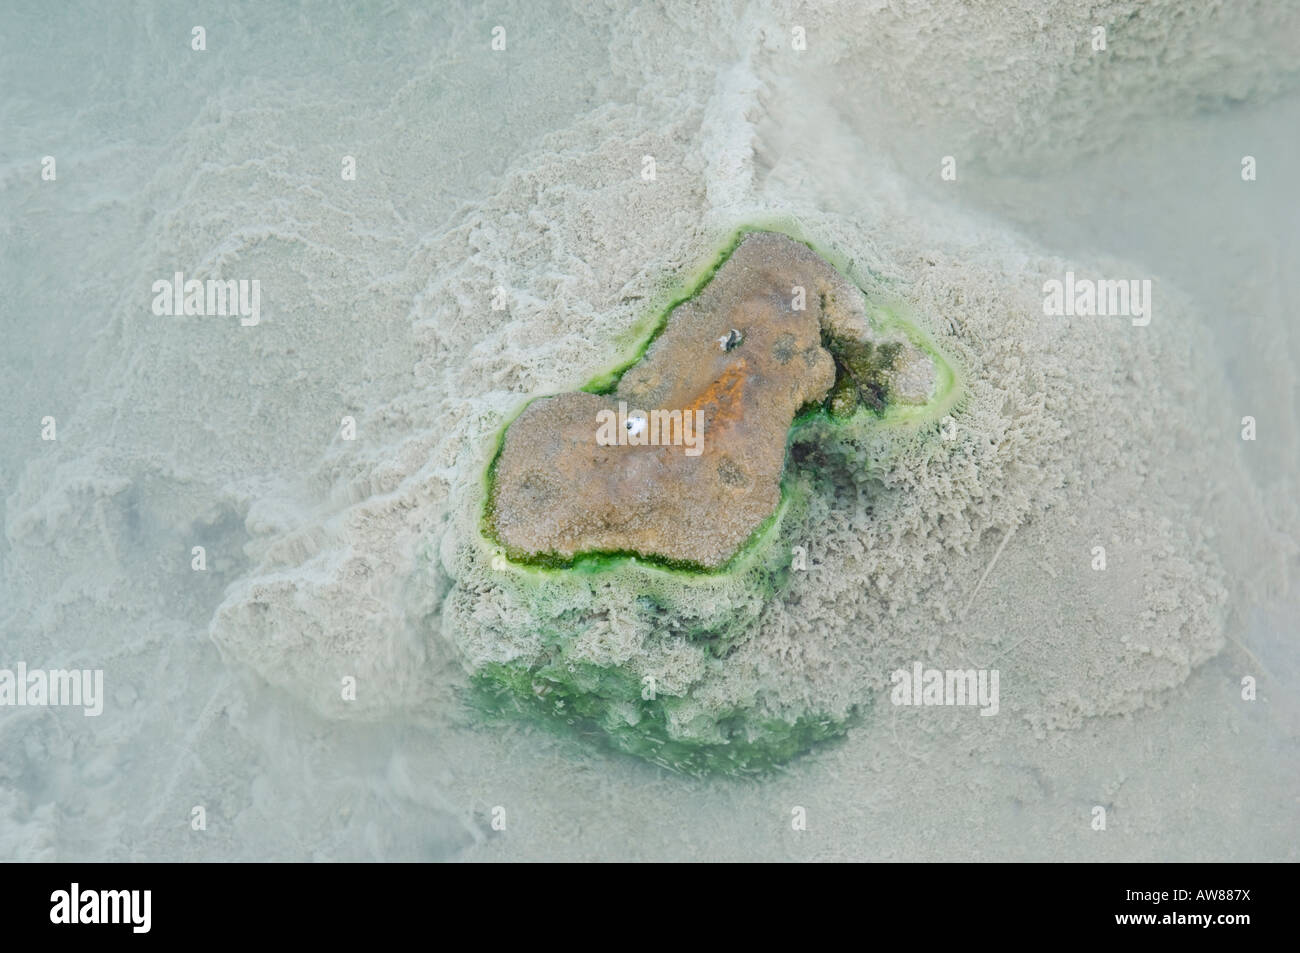 sulphureous water and caked rock Stock Photo